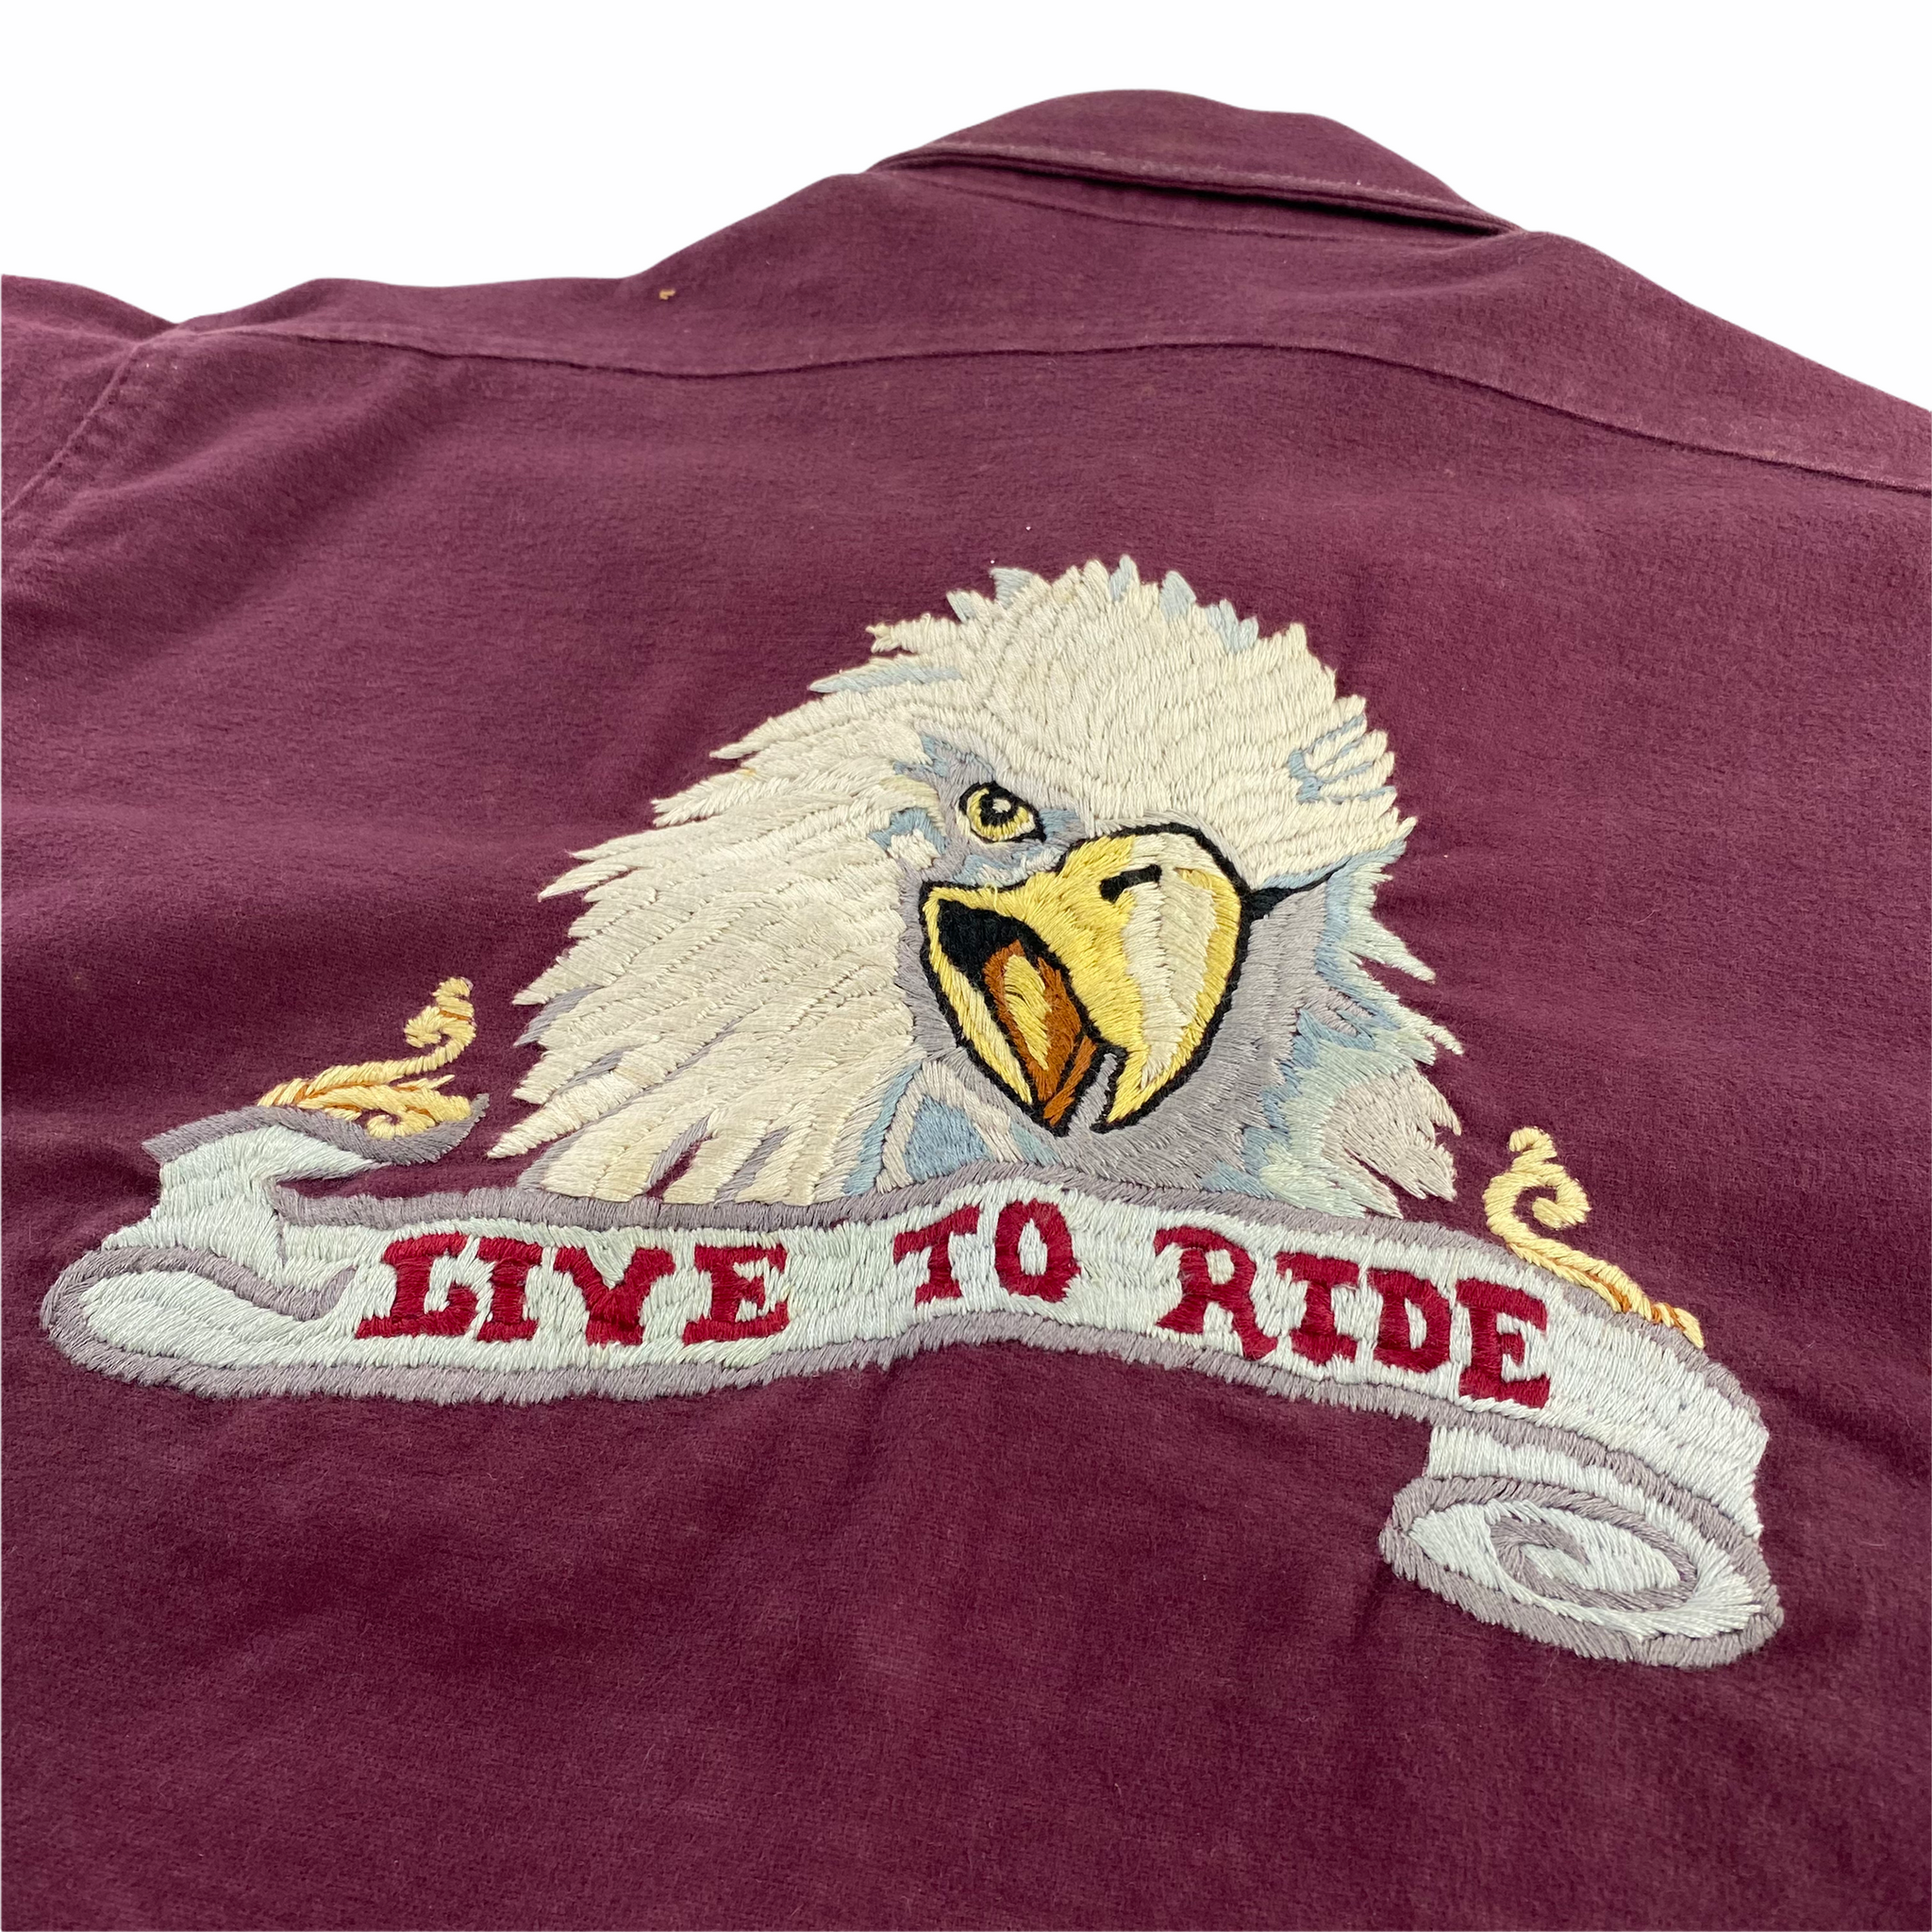 80s Chamois shirt. custom eagle embroidery and harley pins. large